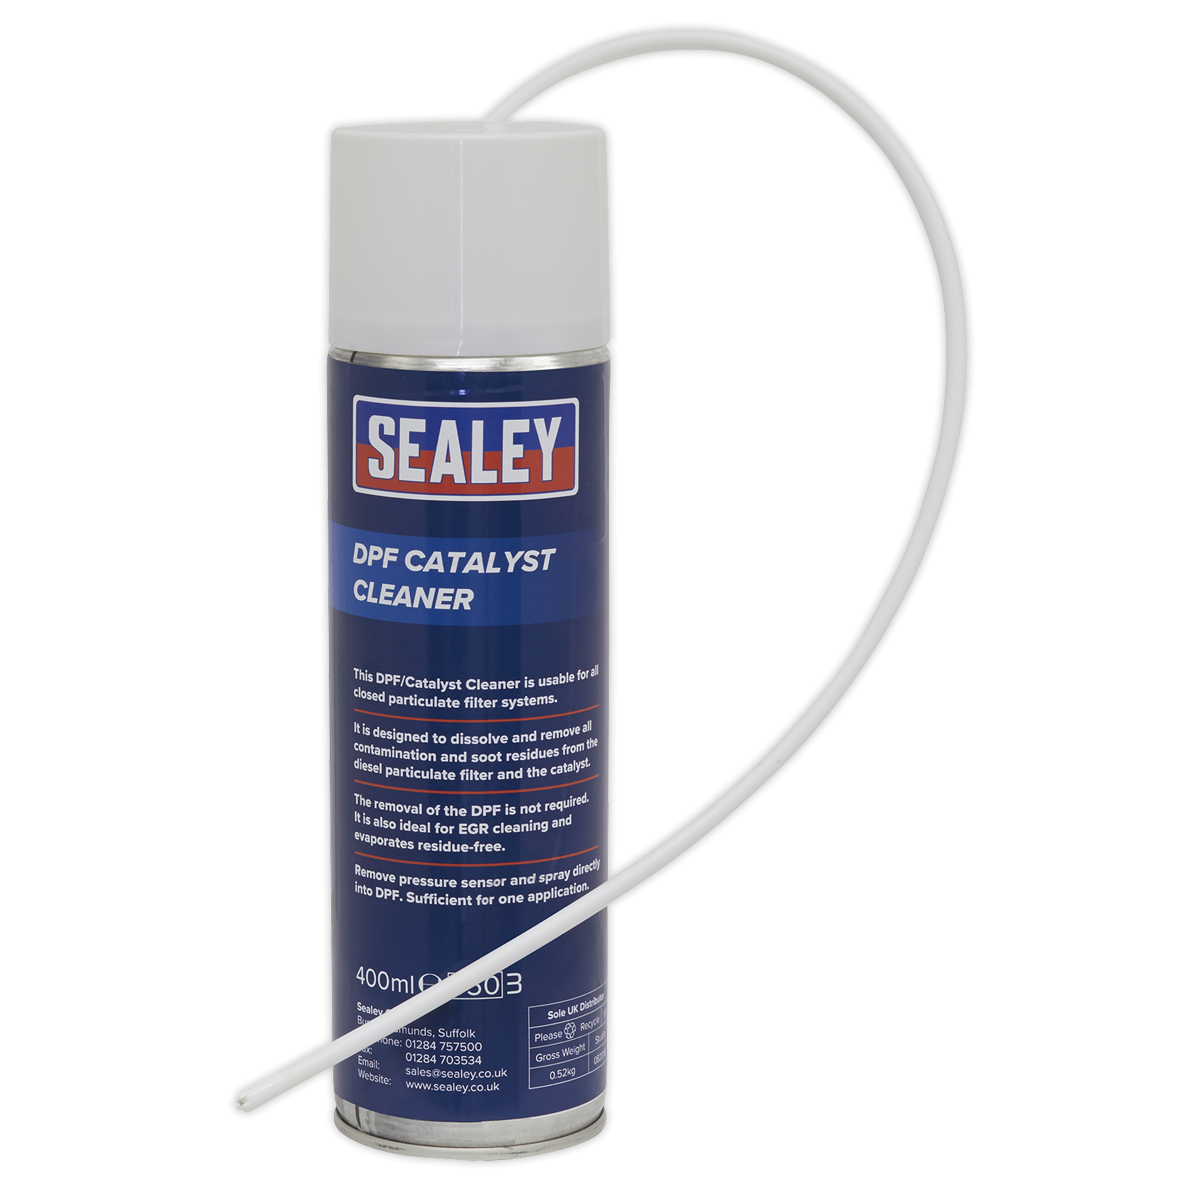 Sealey DPFCA400 DPF Catalyst Cleaner from Lawson HIS